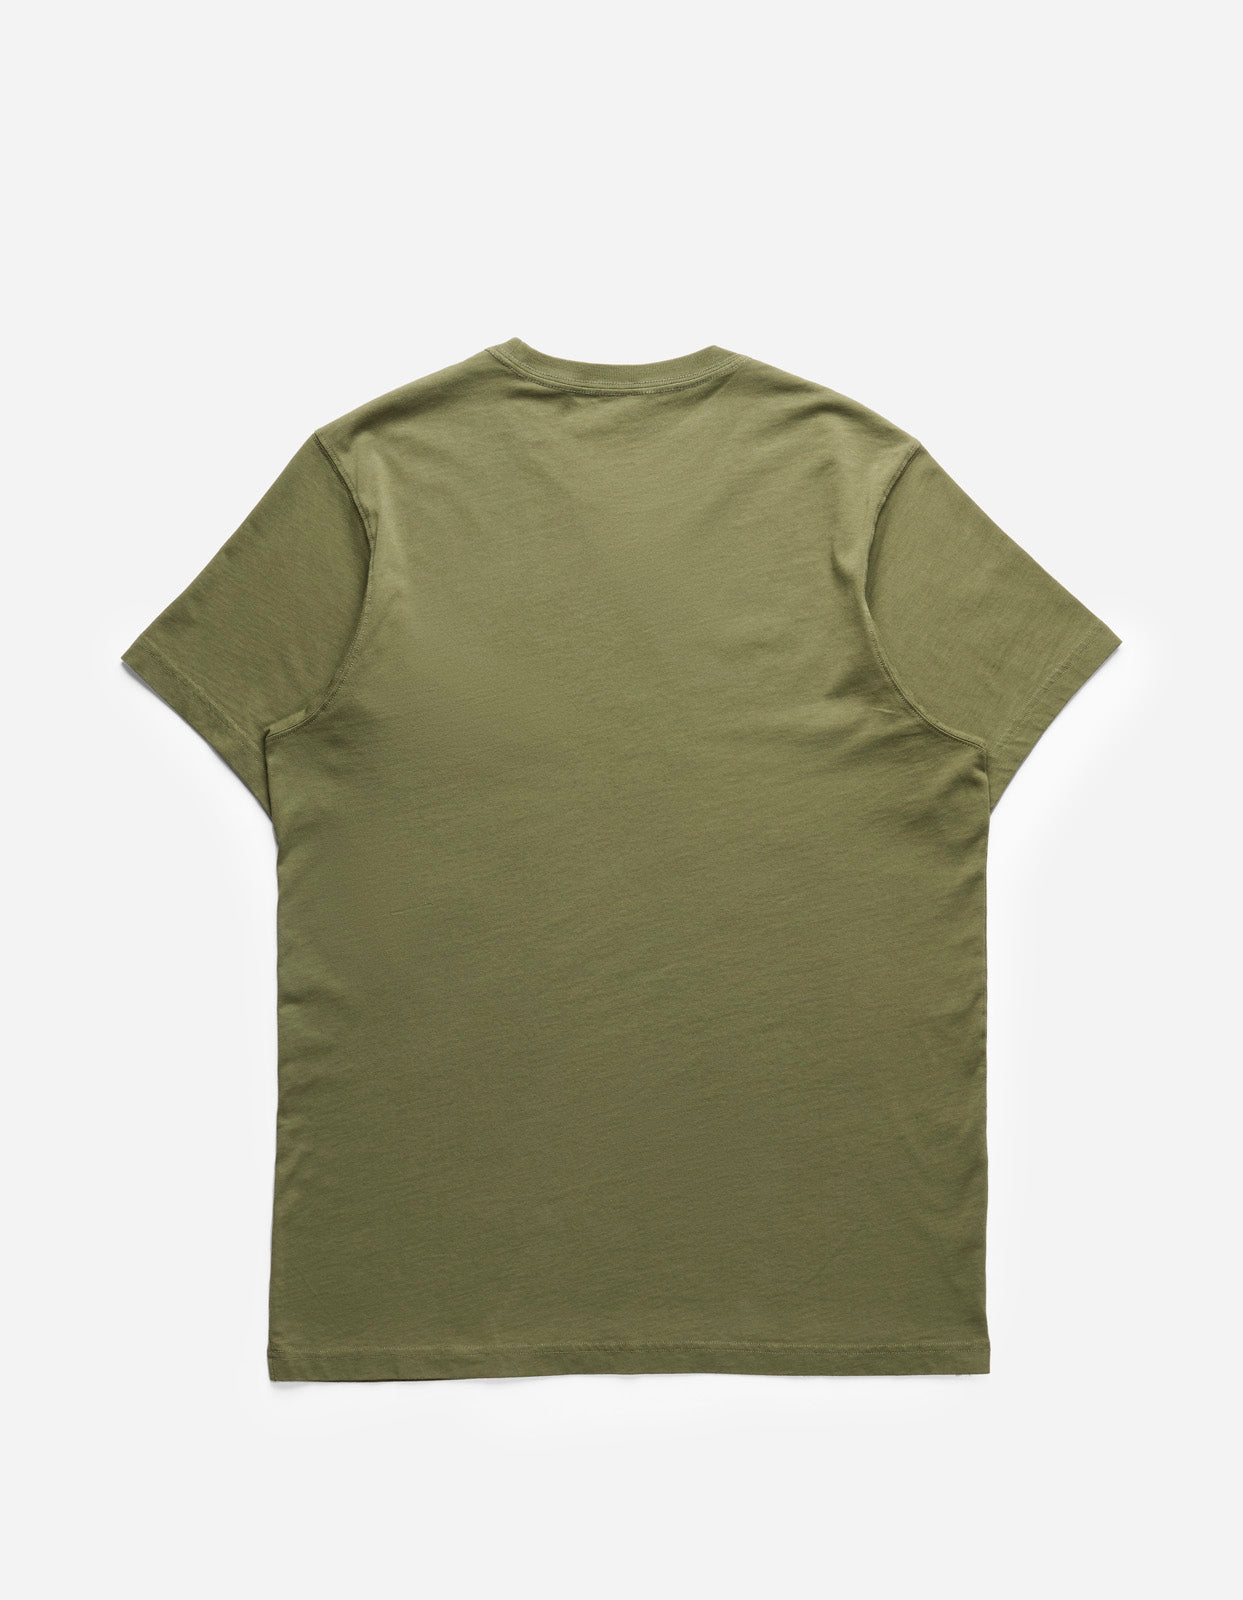 1070 Invisible Warrior T-Shirt Olive